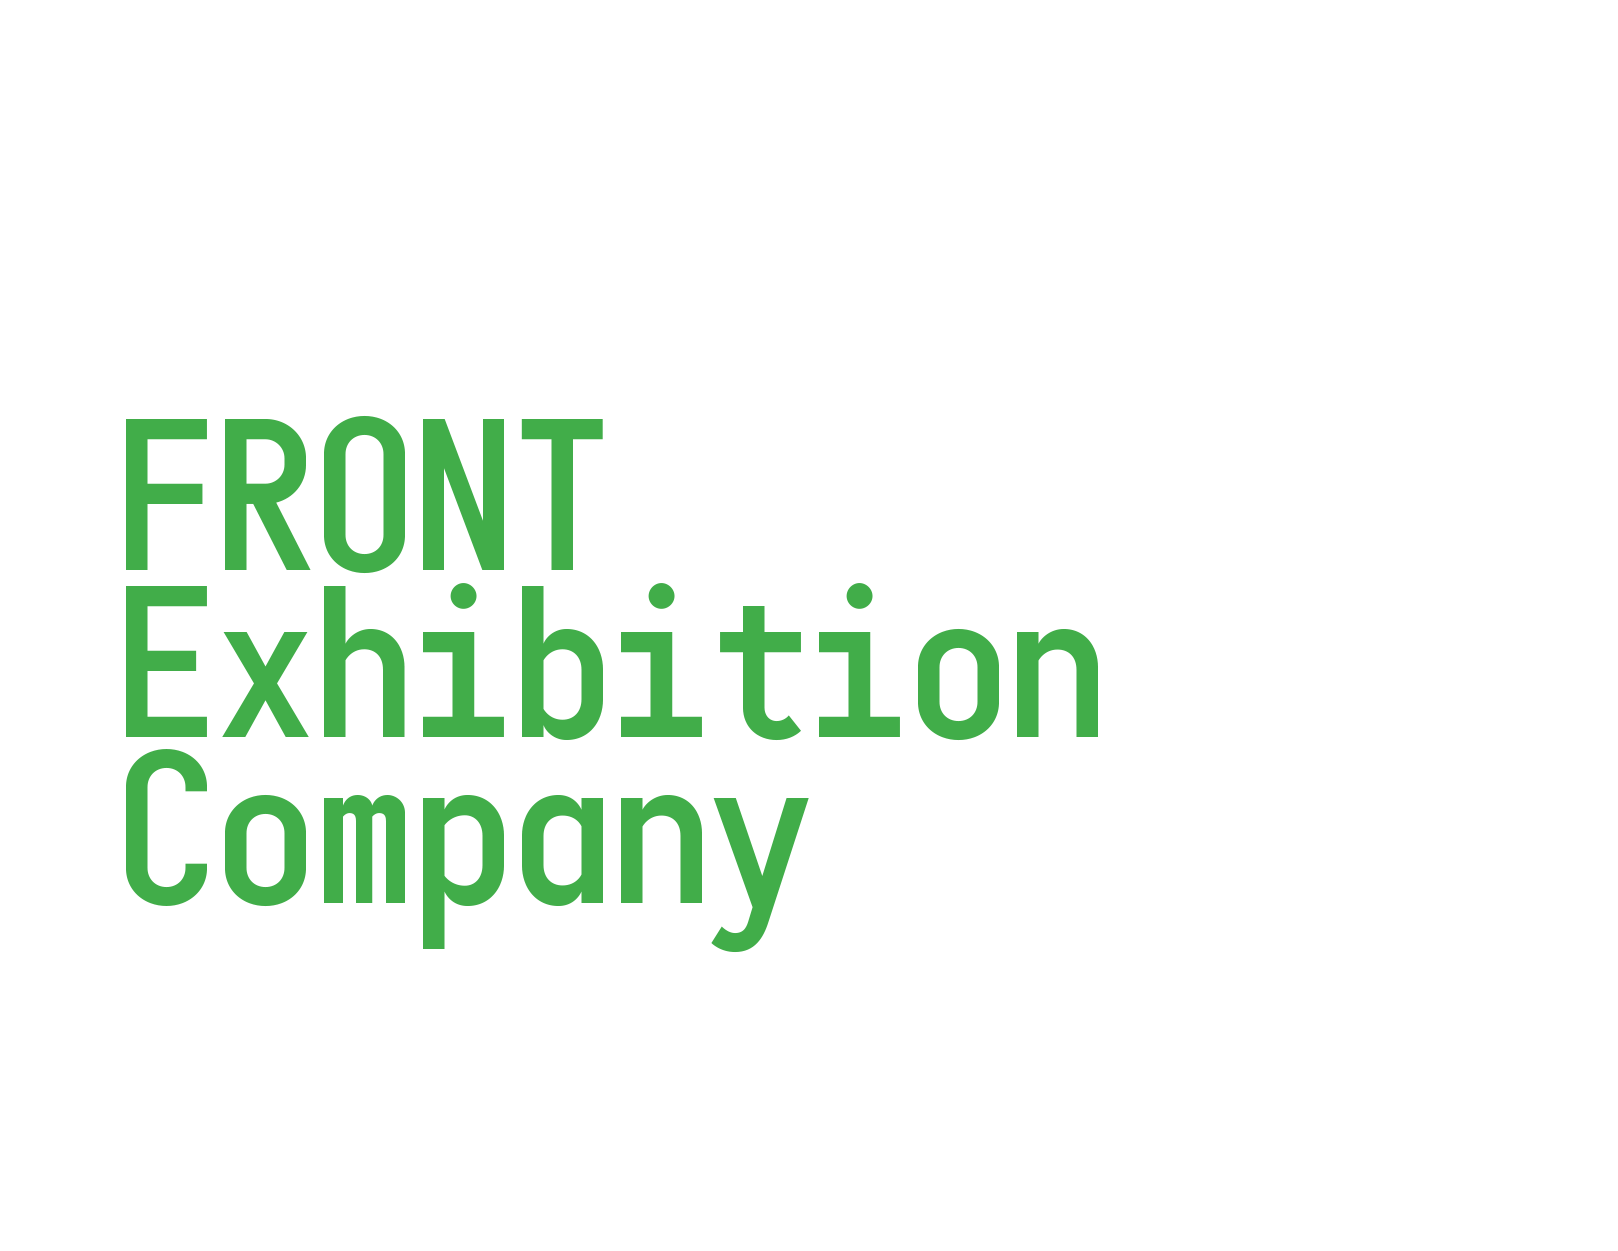 FRONT Exhibition Company